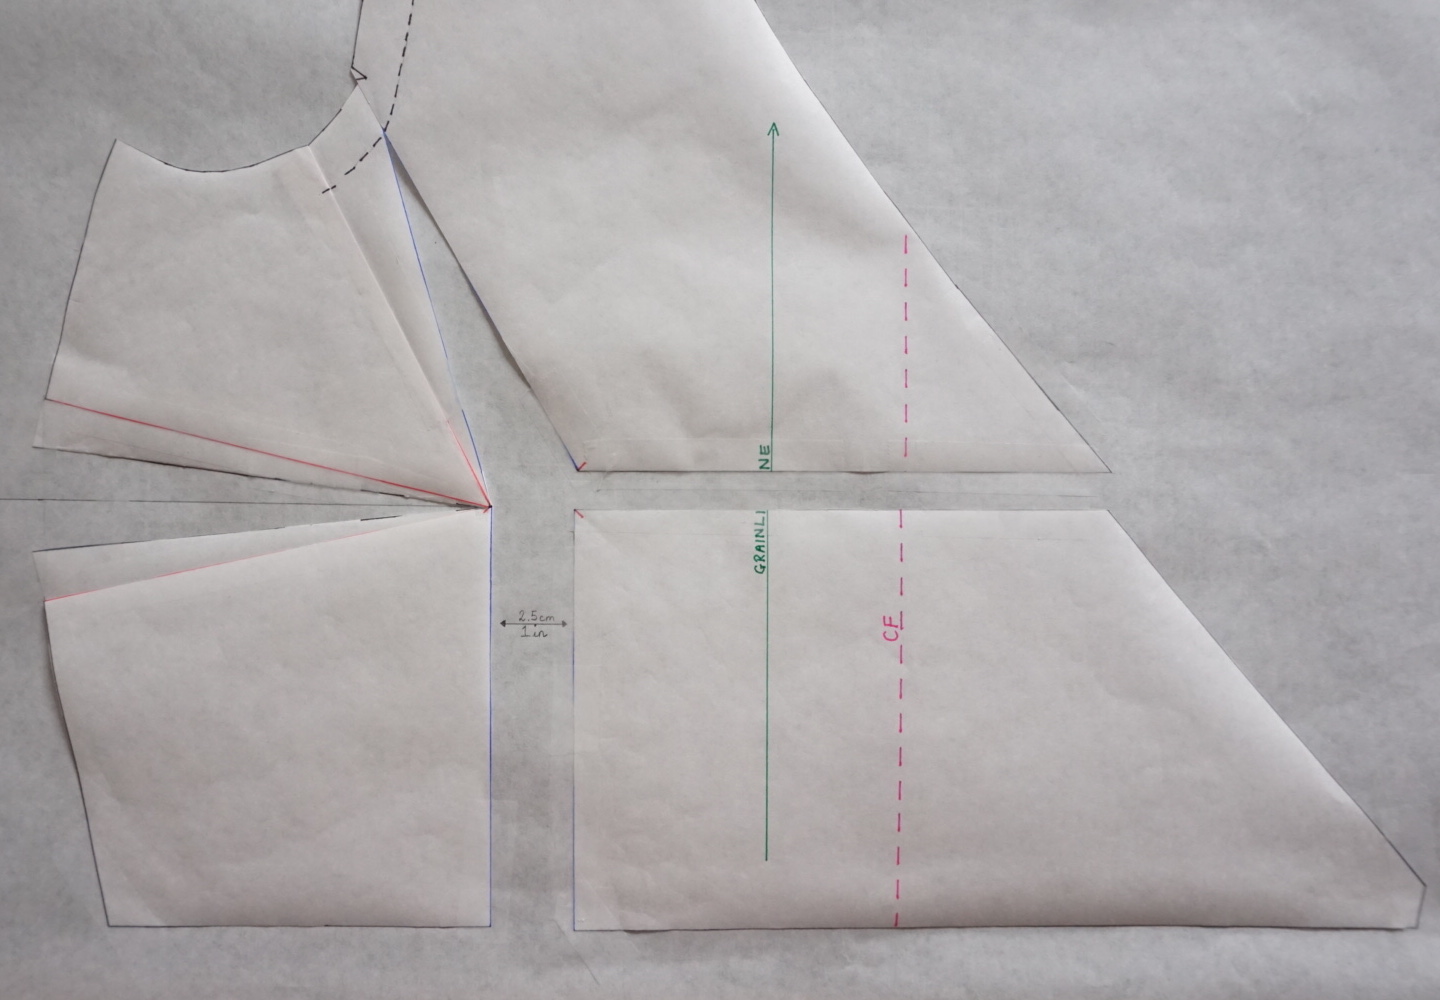 Move the lower piece down to align the waist seam, ensuring the grainline remains straight